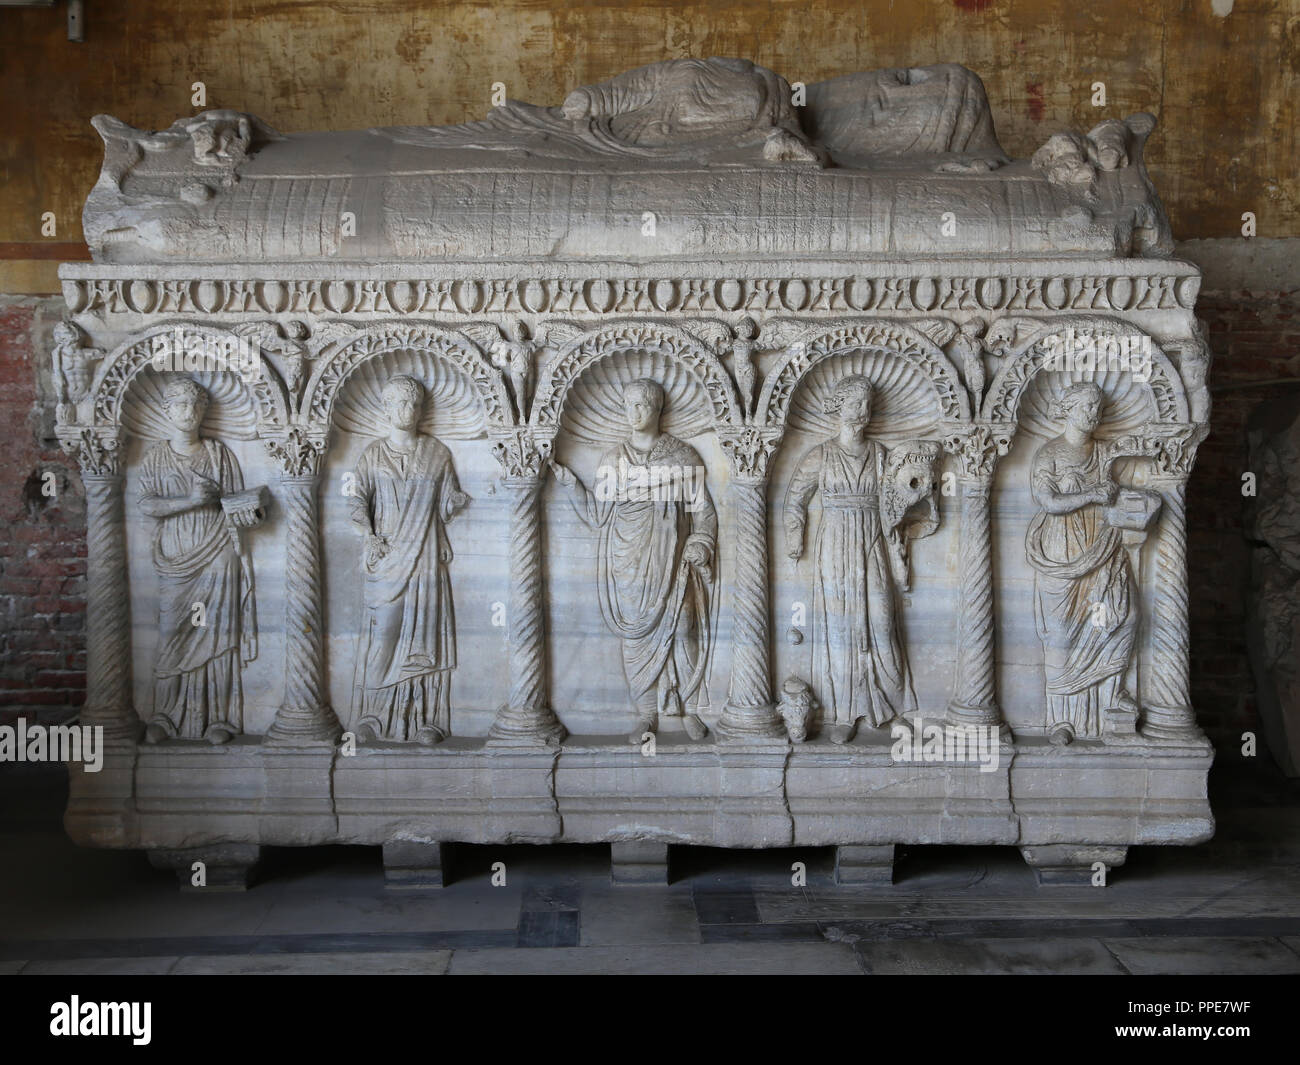 Italy. Pisa. Campo Santo. Roman sarcophagus decorated with mythological figures,  The Muses. c. 250. 3rd century. Tuscany. Stock Photo